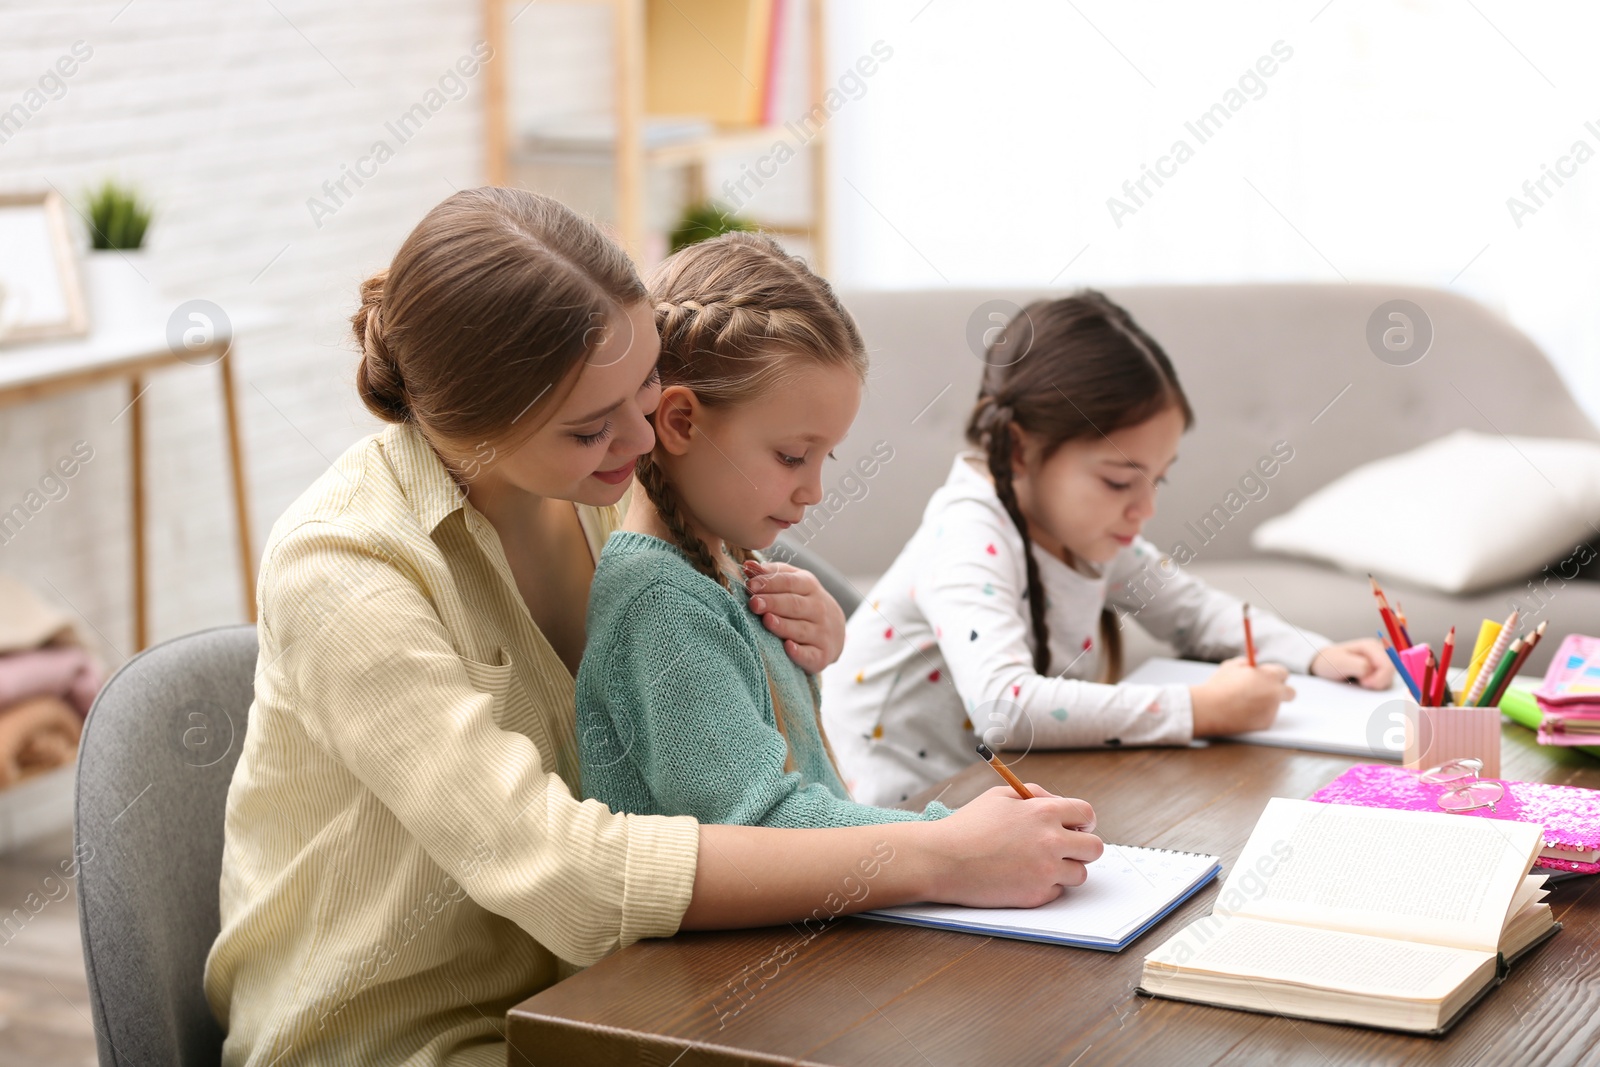 Photo of Mother helping her daughters with homework at table indoors